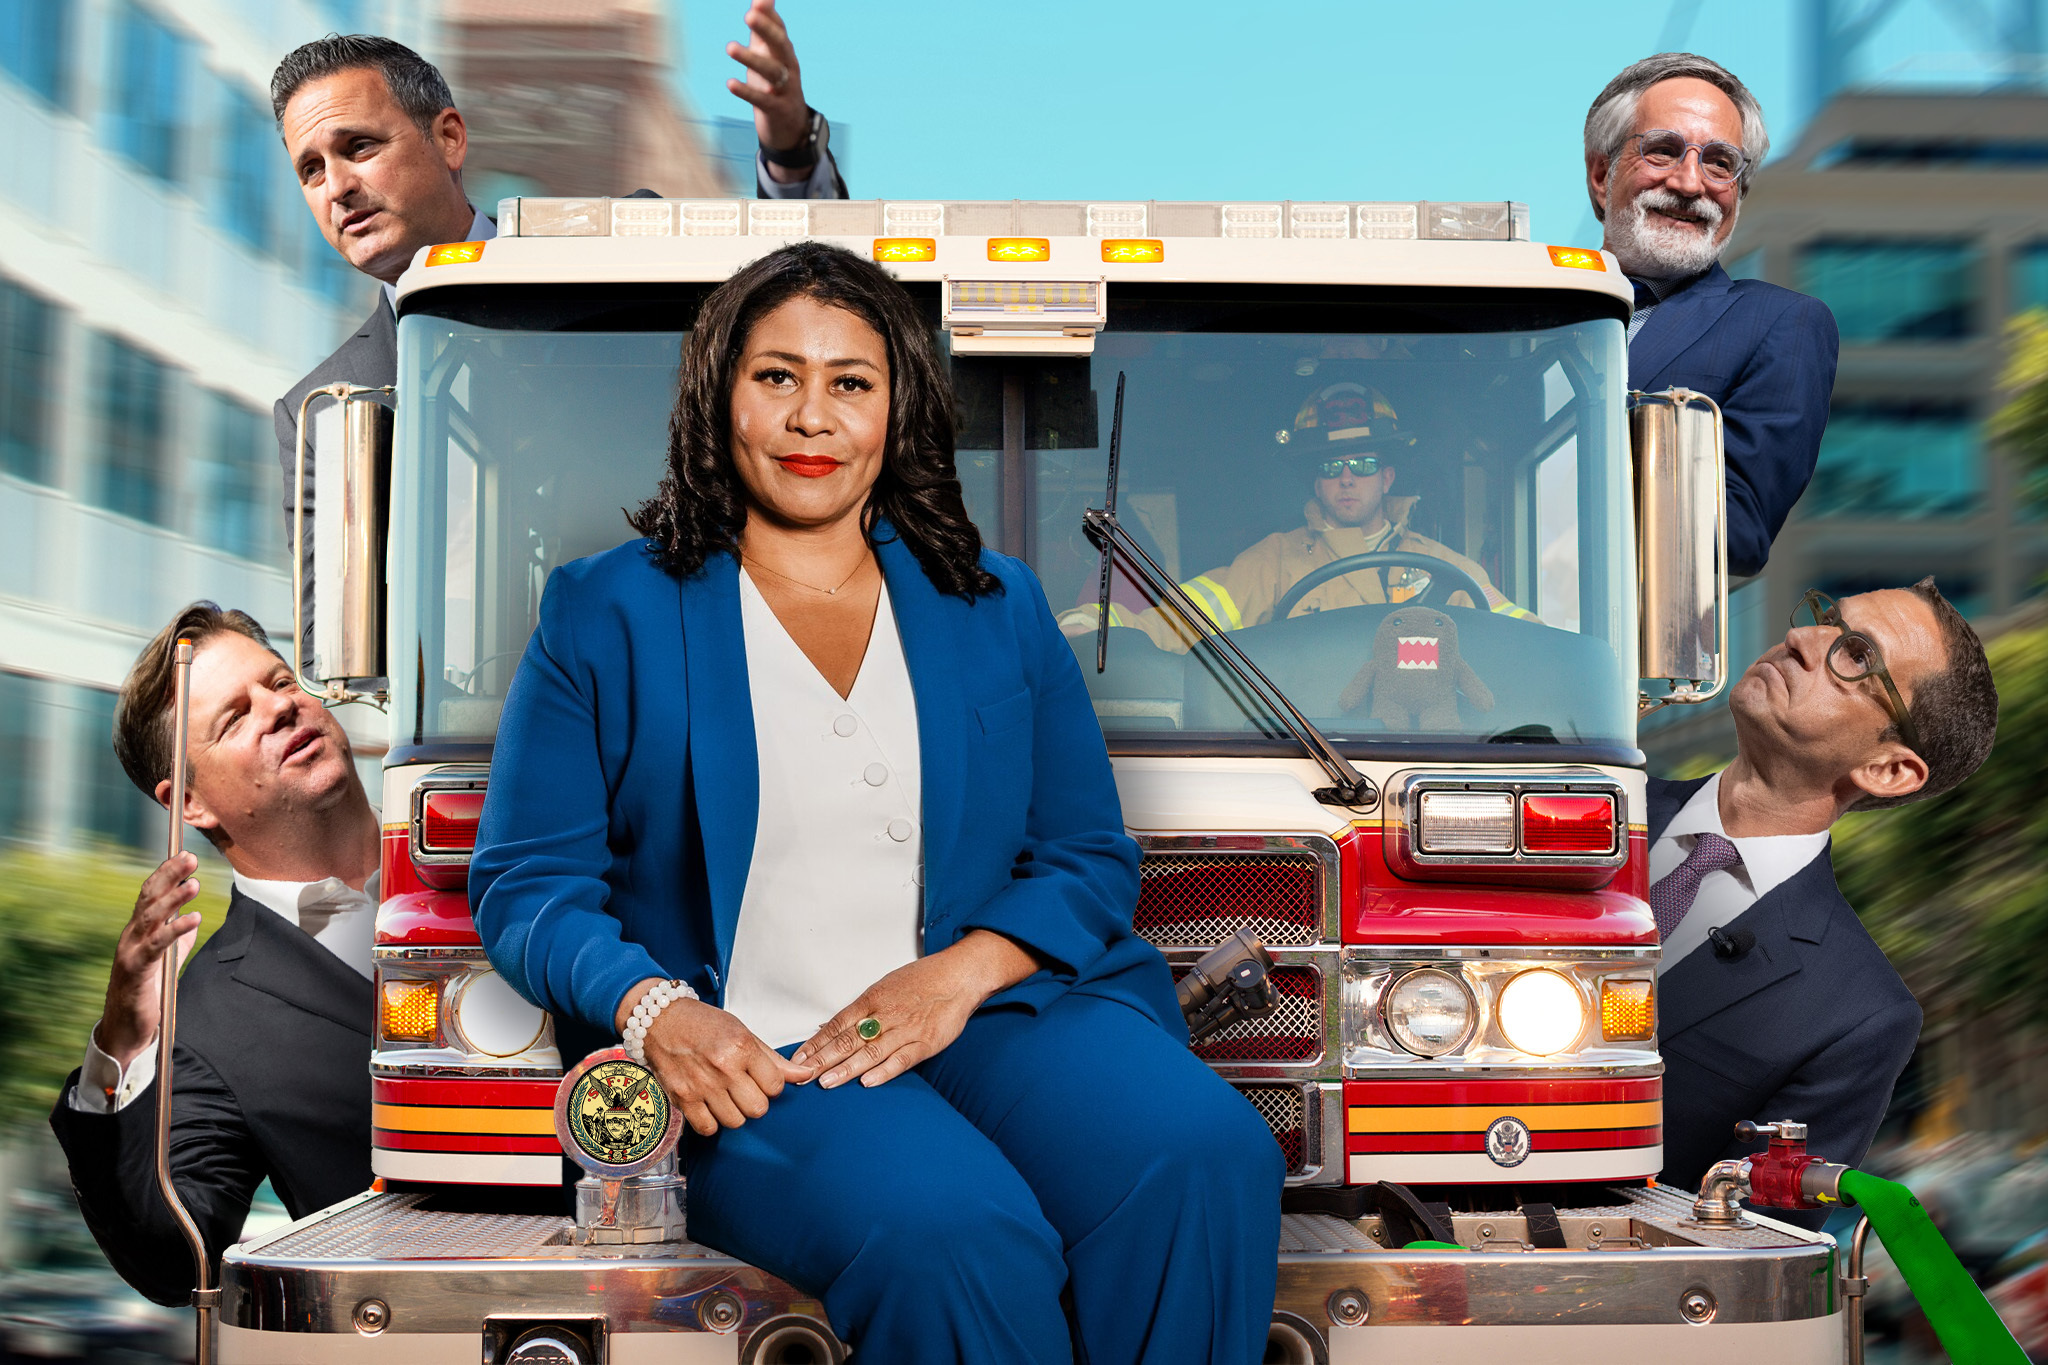 A woman in a blue suit sits on the front of a fire truck, surrounded by five men in suits who appear to be posing playfully. A firefighter is visible inside the truck.